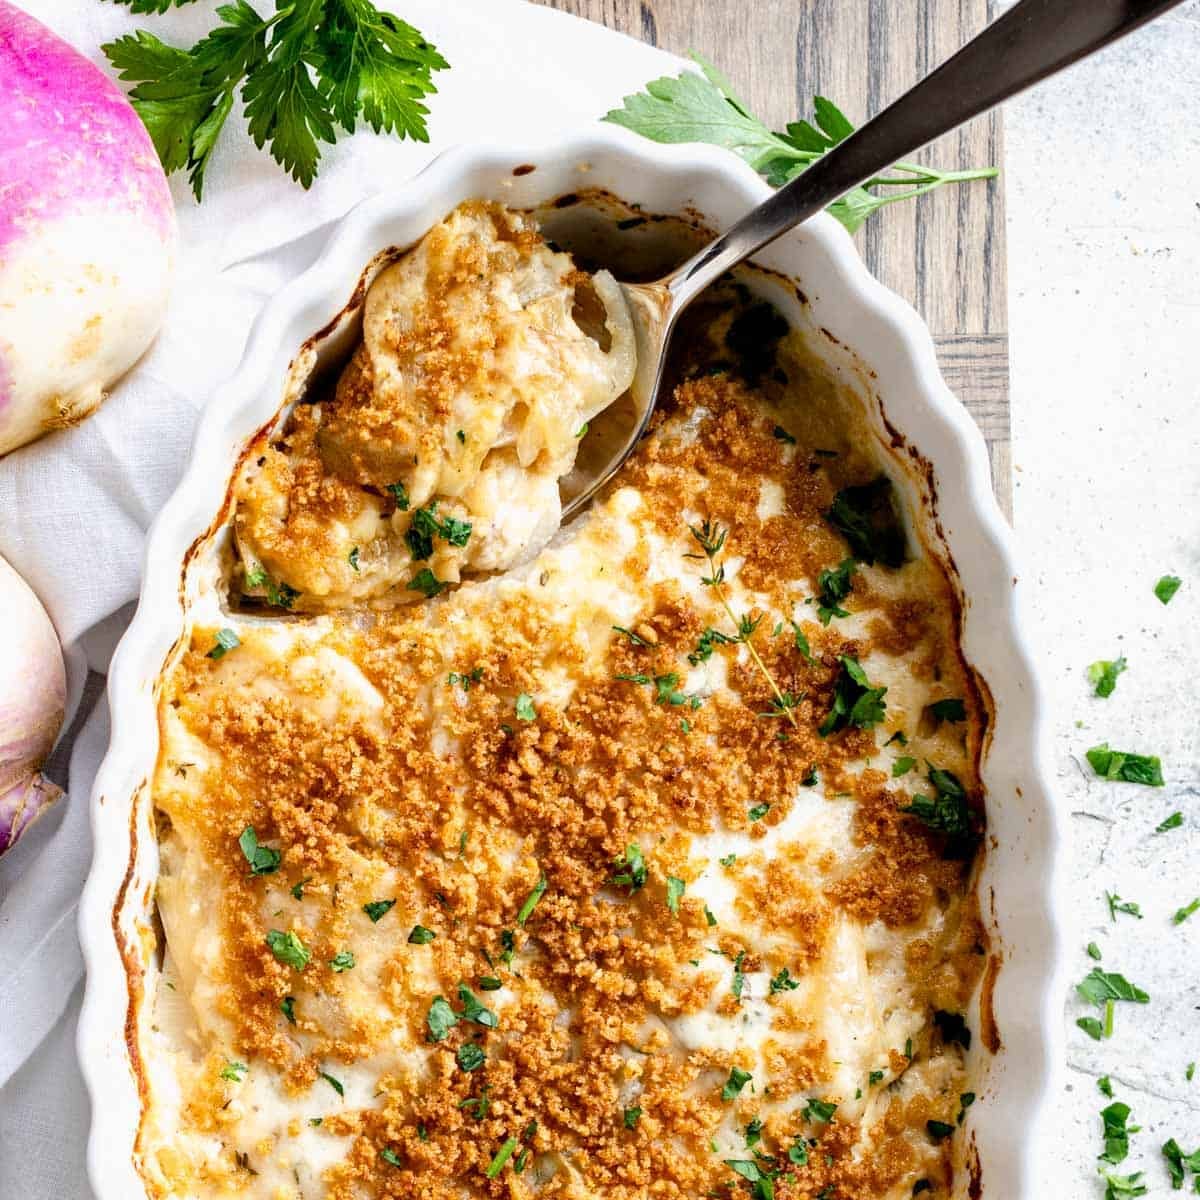 turnip casserole in scalloped white baking dish with serving spoon